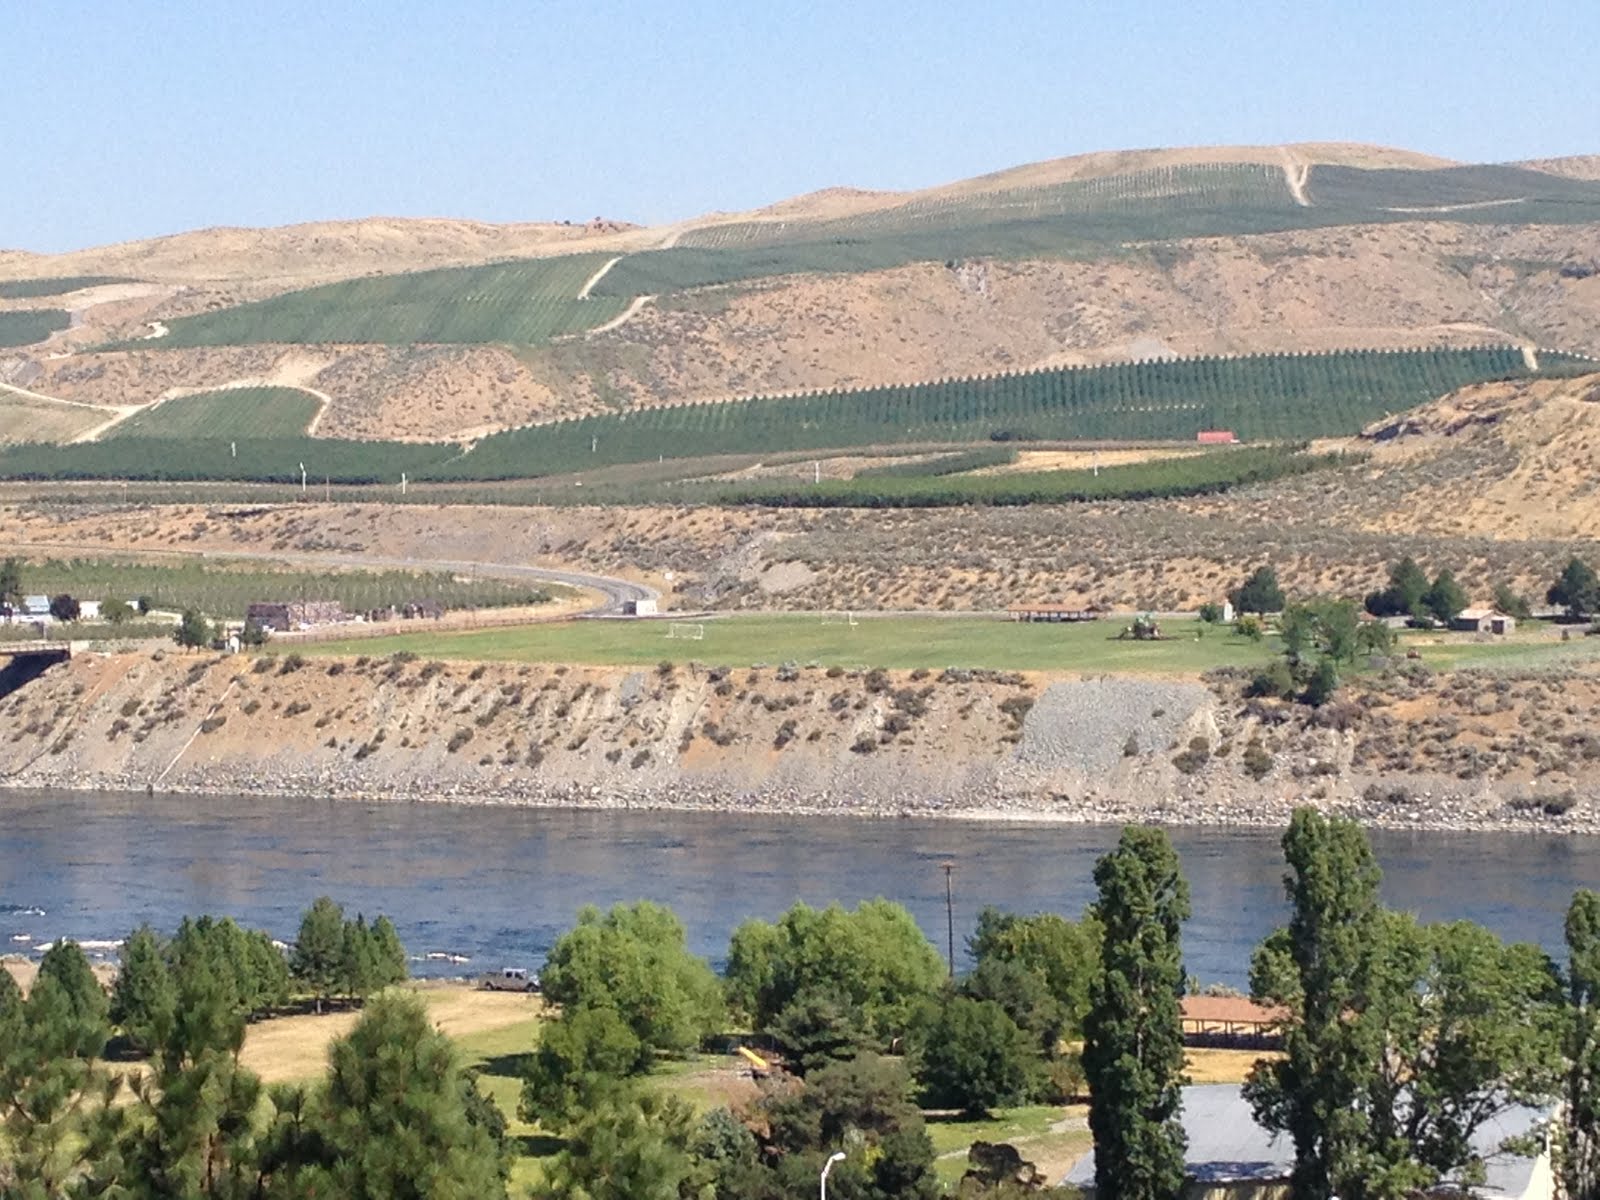 Irrigation along the Columbia River, one of the many things that concrete makes possible